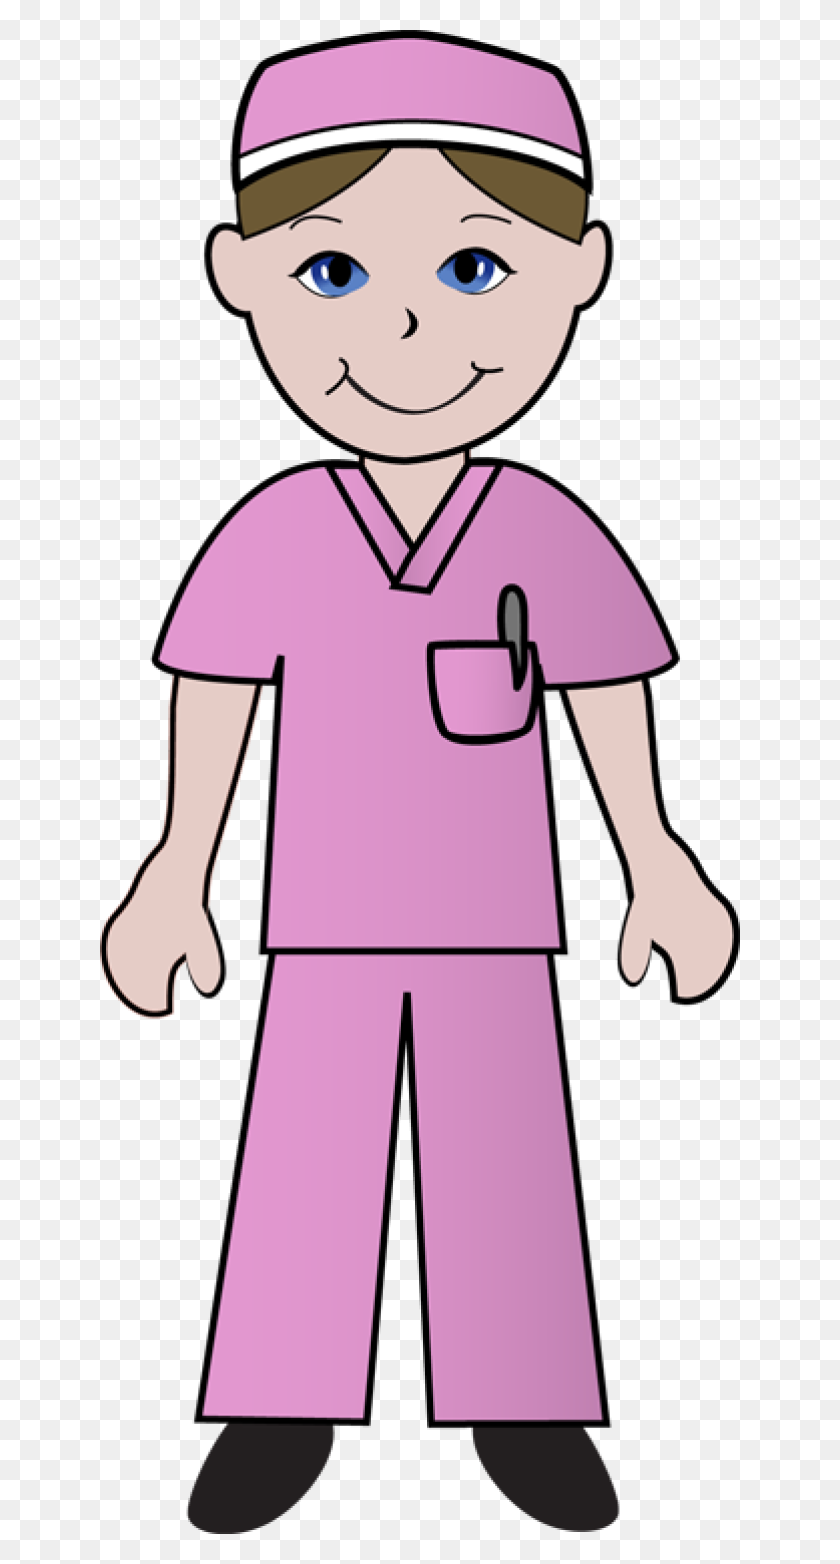 640x1504 Cartoon Picture Of A Nurse Image Group - Snapping Fingers Clipart